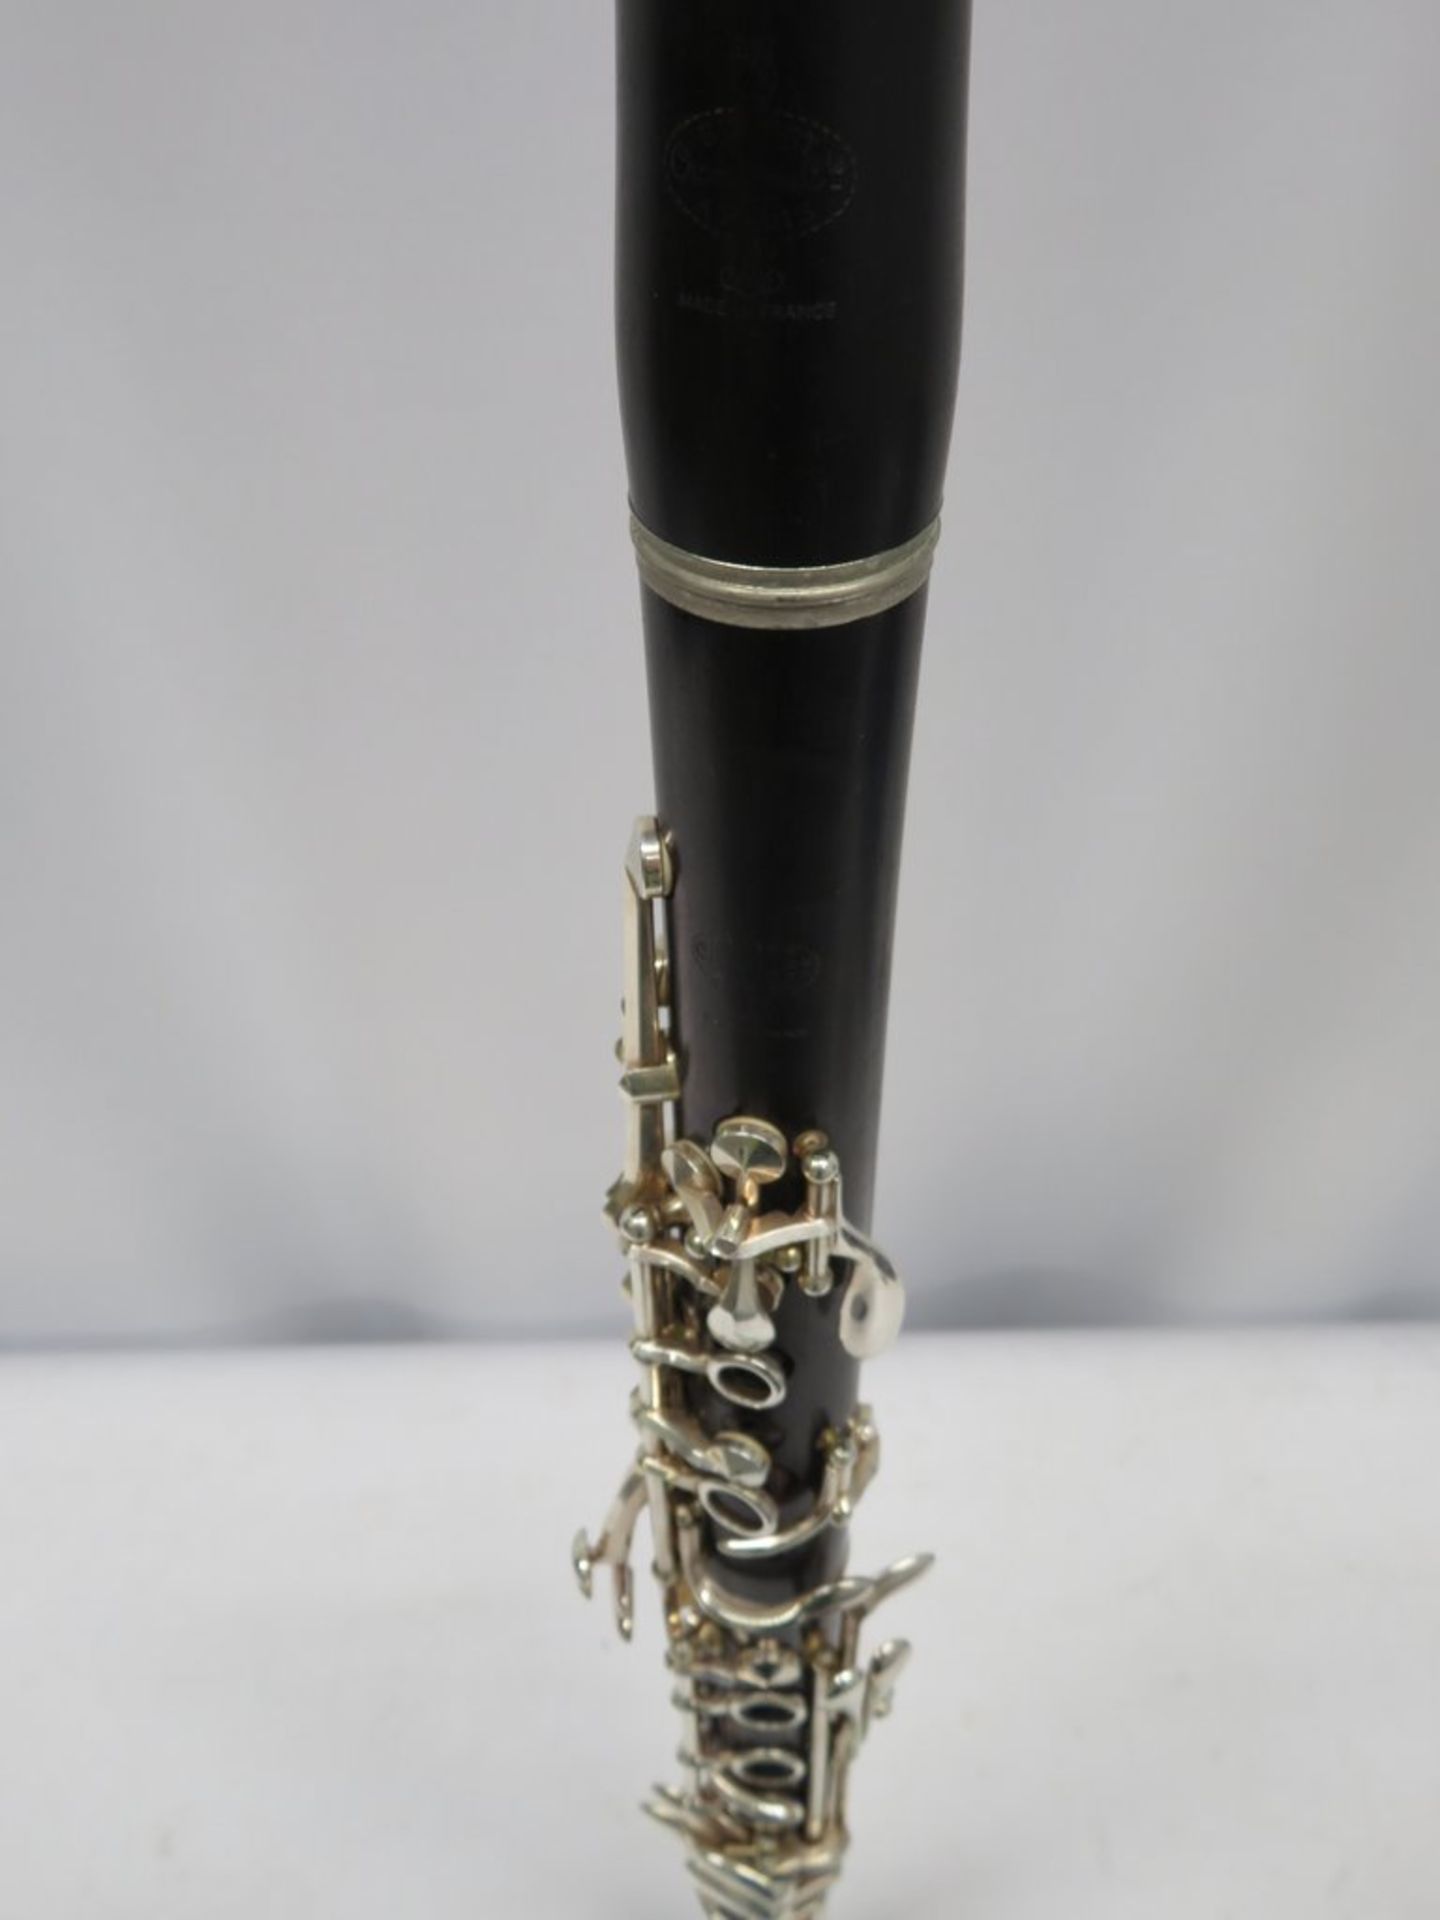 Buffet Crampon R13 Clarinet With Case. Serial Number: 386372. Full Length 63cm. Please No - Image 4 of 14